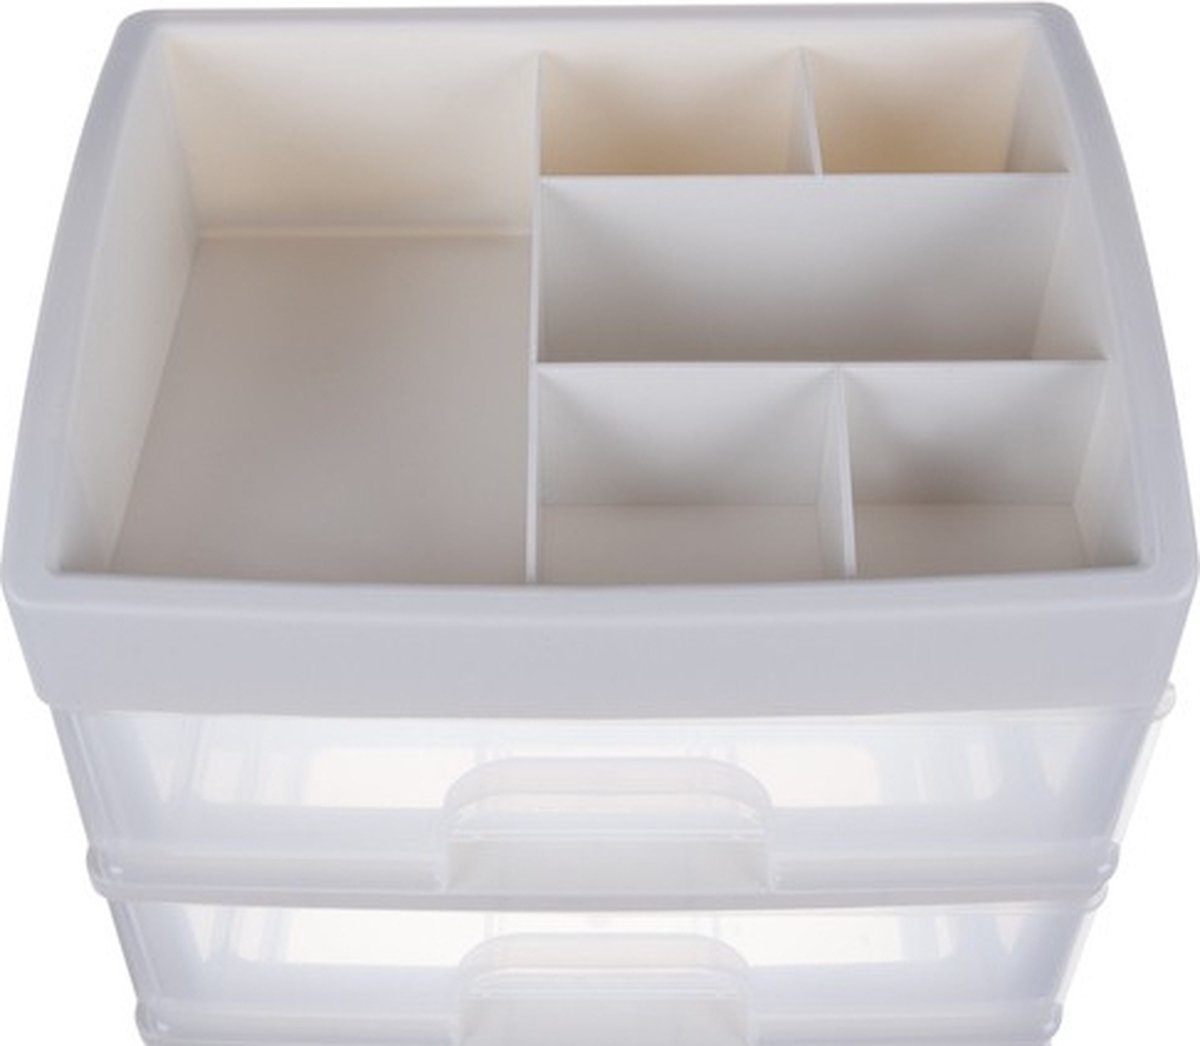 Cosmetics Organizer XL Deluxe - Make up Storage Box - White - with 3  drawers and 6 storage compartments - 27x23.5x16.5 cm